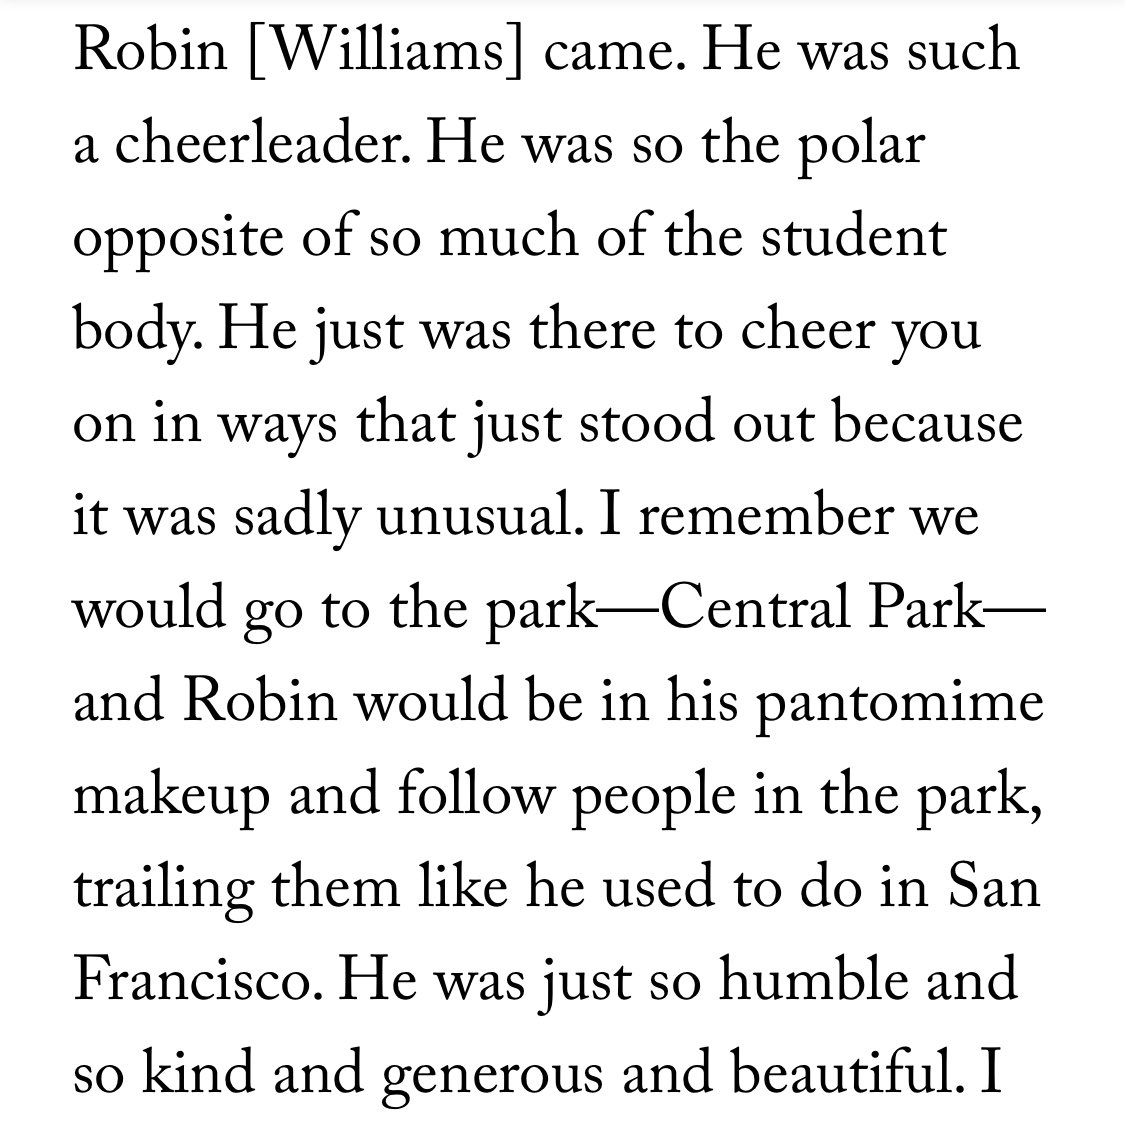 lastly, mandy, who studied at juilliard at the same time as robin williams, had such lovely things to say about his former classmate. robin was the guy who would stick around to watch everyone else perform and cheer them on. a generous, gregarious soul.